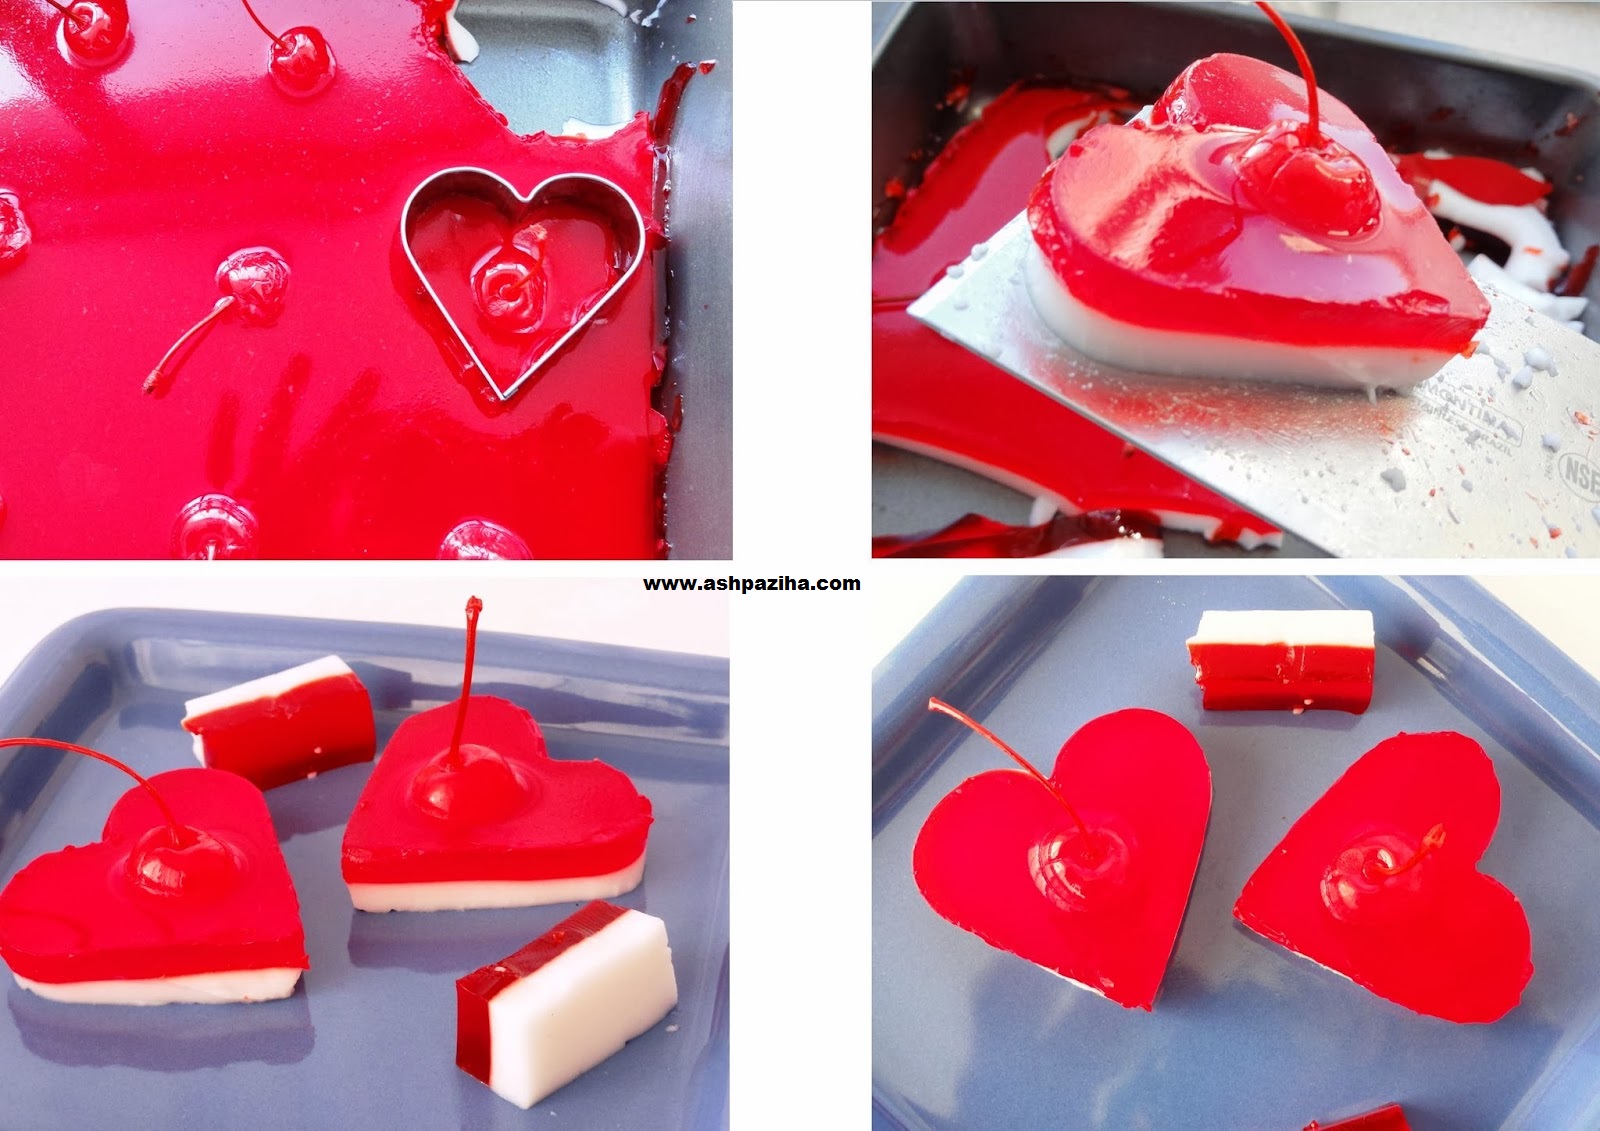 Mode - preparation - Jelly - heart - shaped - with - Cherry - Specials - Valentine (4)